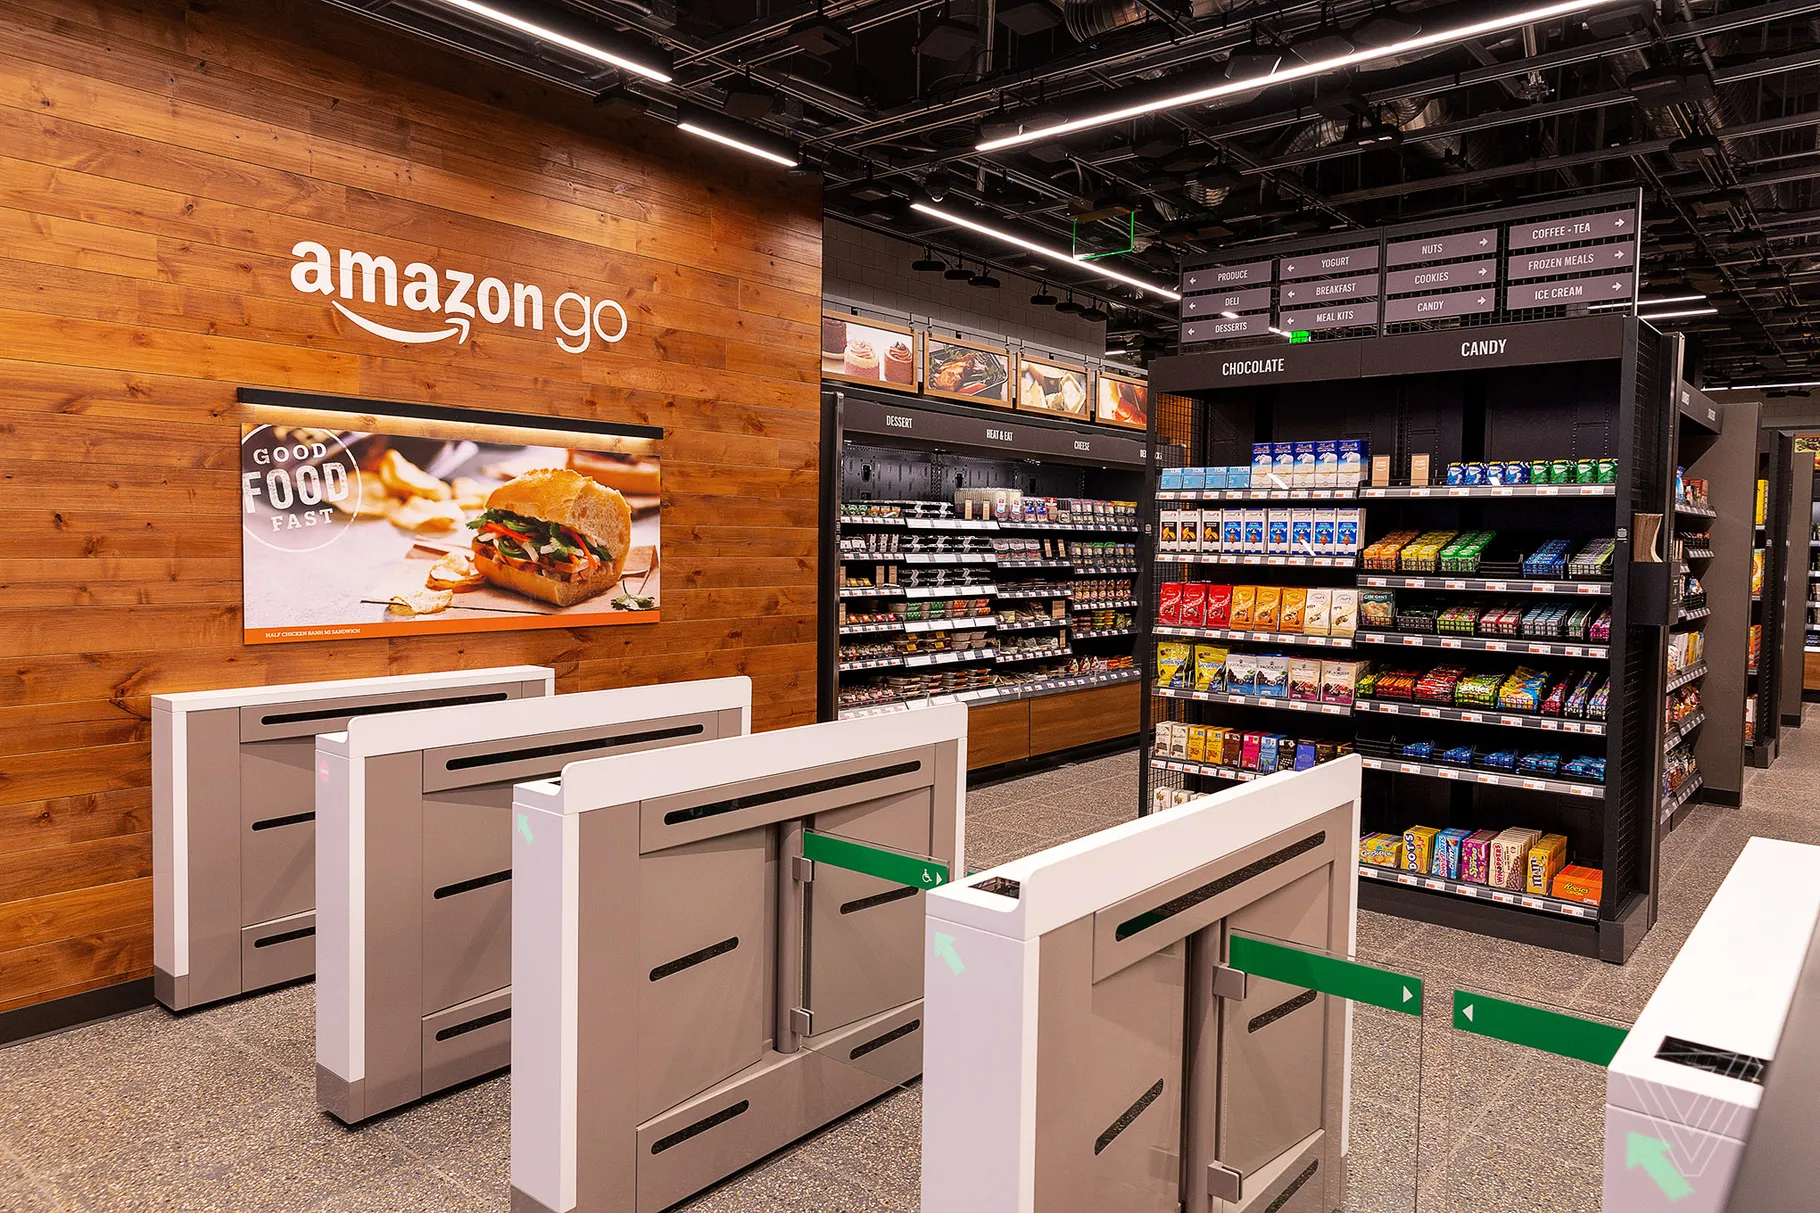 The complex and incredible technologies driving the AmazonGo stores